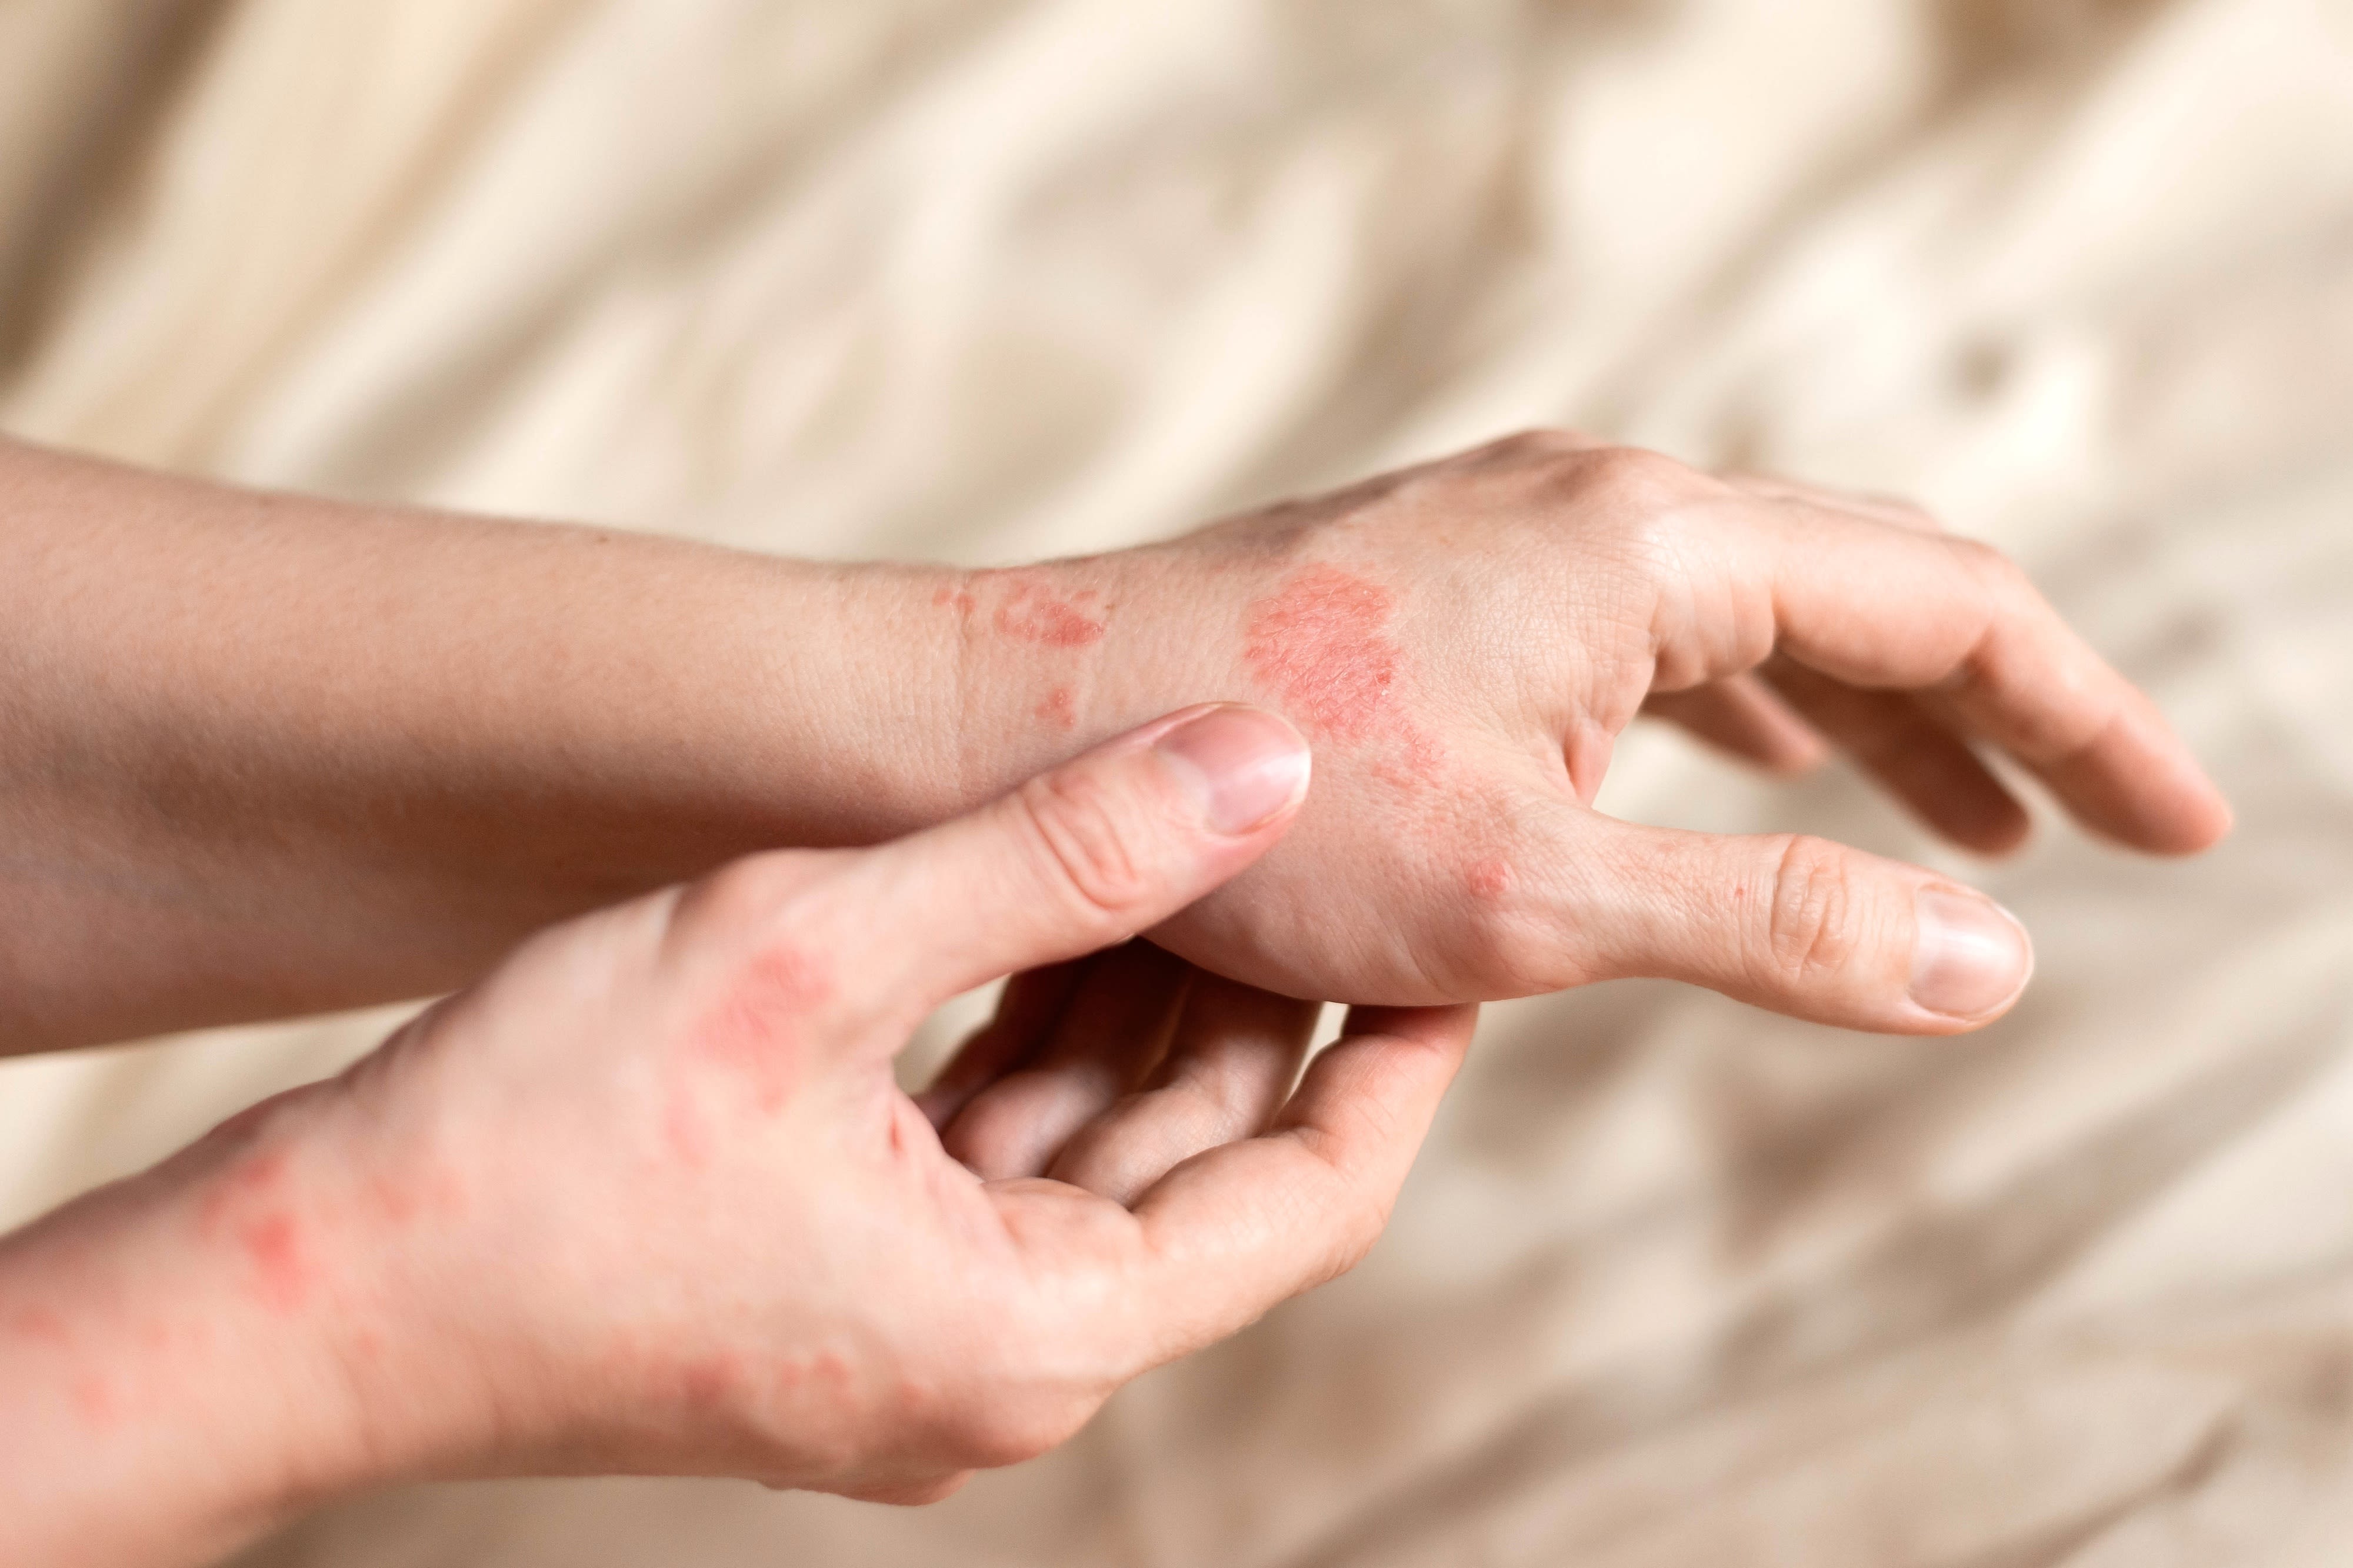 A salty diet may increase eczema in adults, study finds